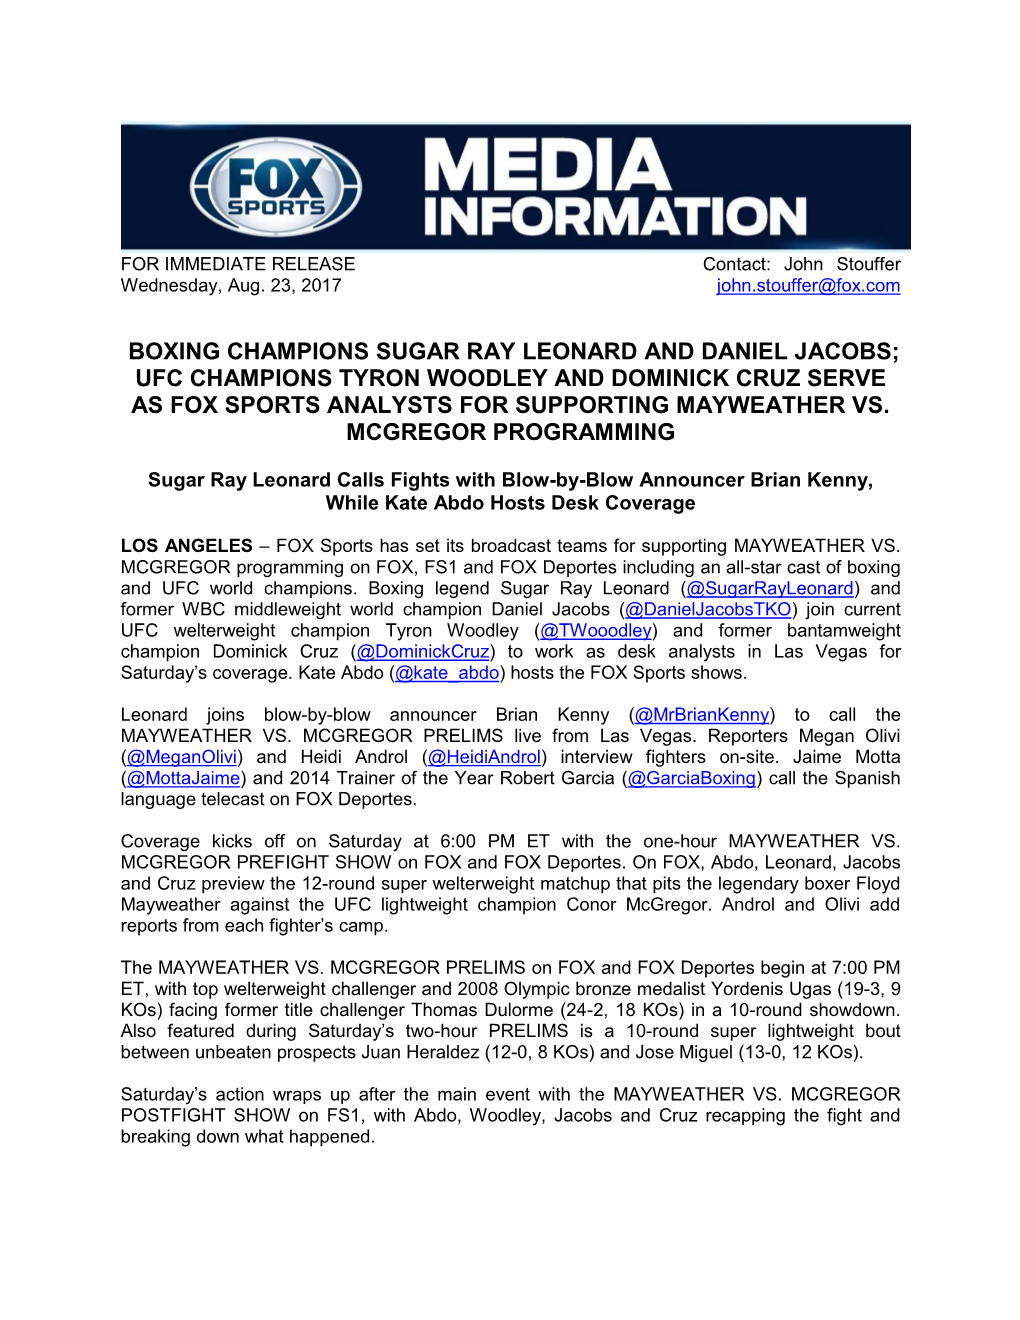 Boxing Champions Sugar Ray Leonard and Daniel Jacobs; Ufc Champions Tyron Woodley and Dominick Cruz Serve As Fox Sports Analysts for Supporting Mayweather Vs